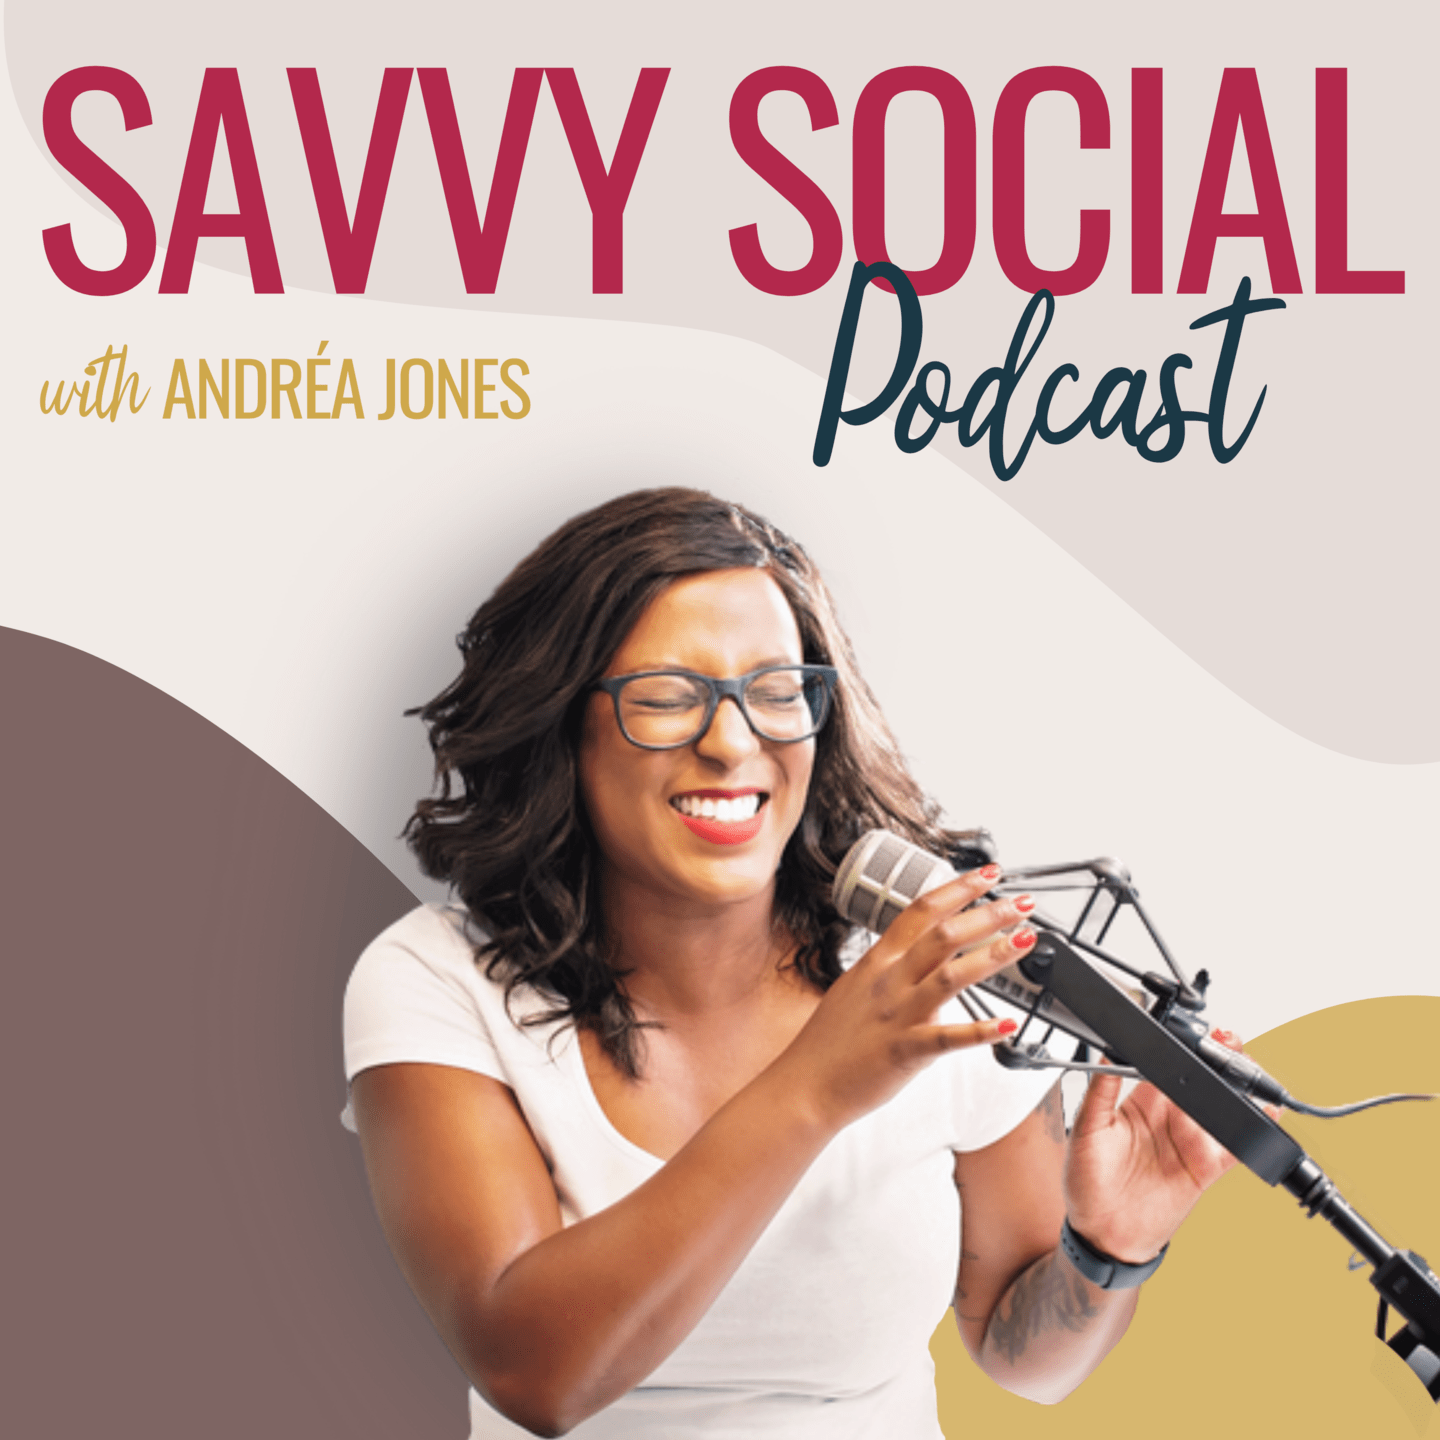 Savvy Social podcast cover image